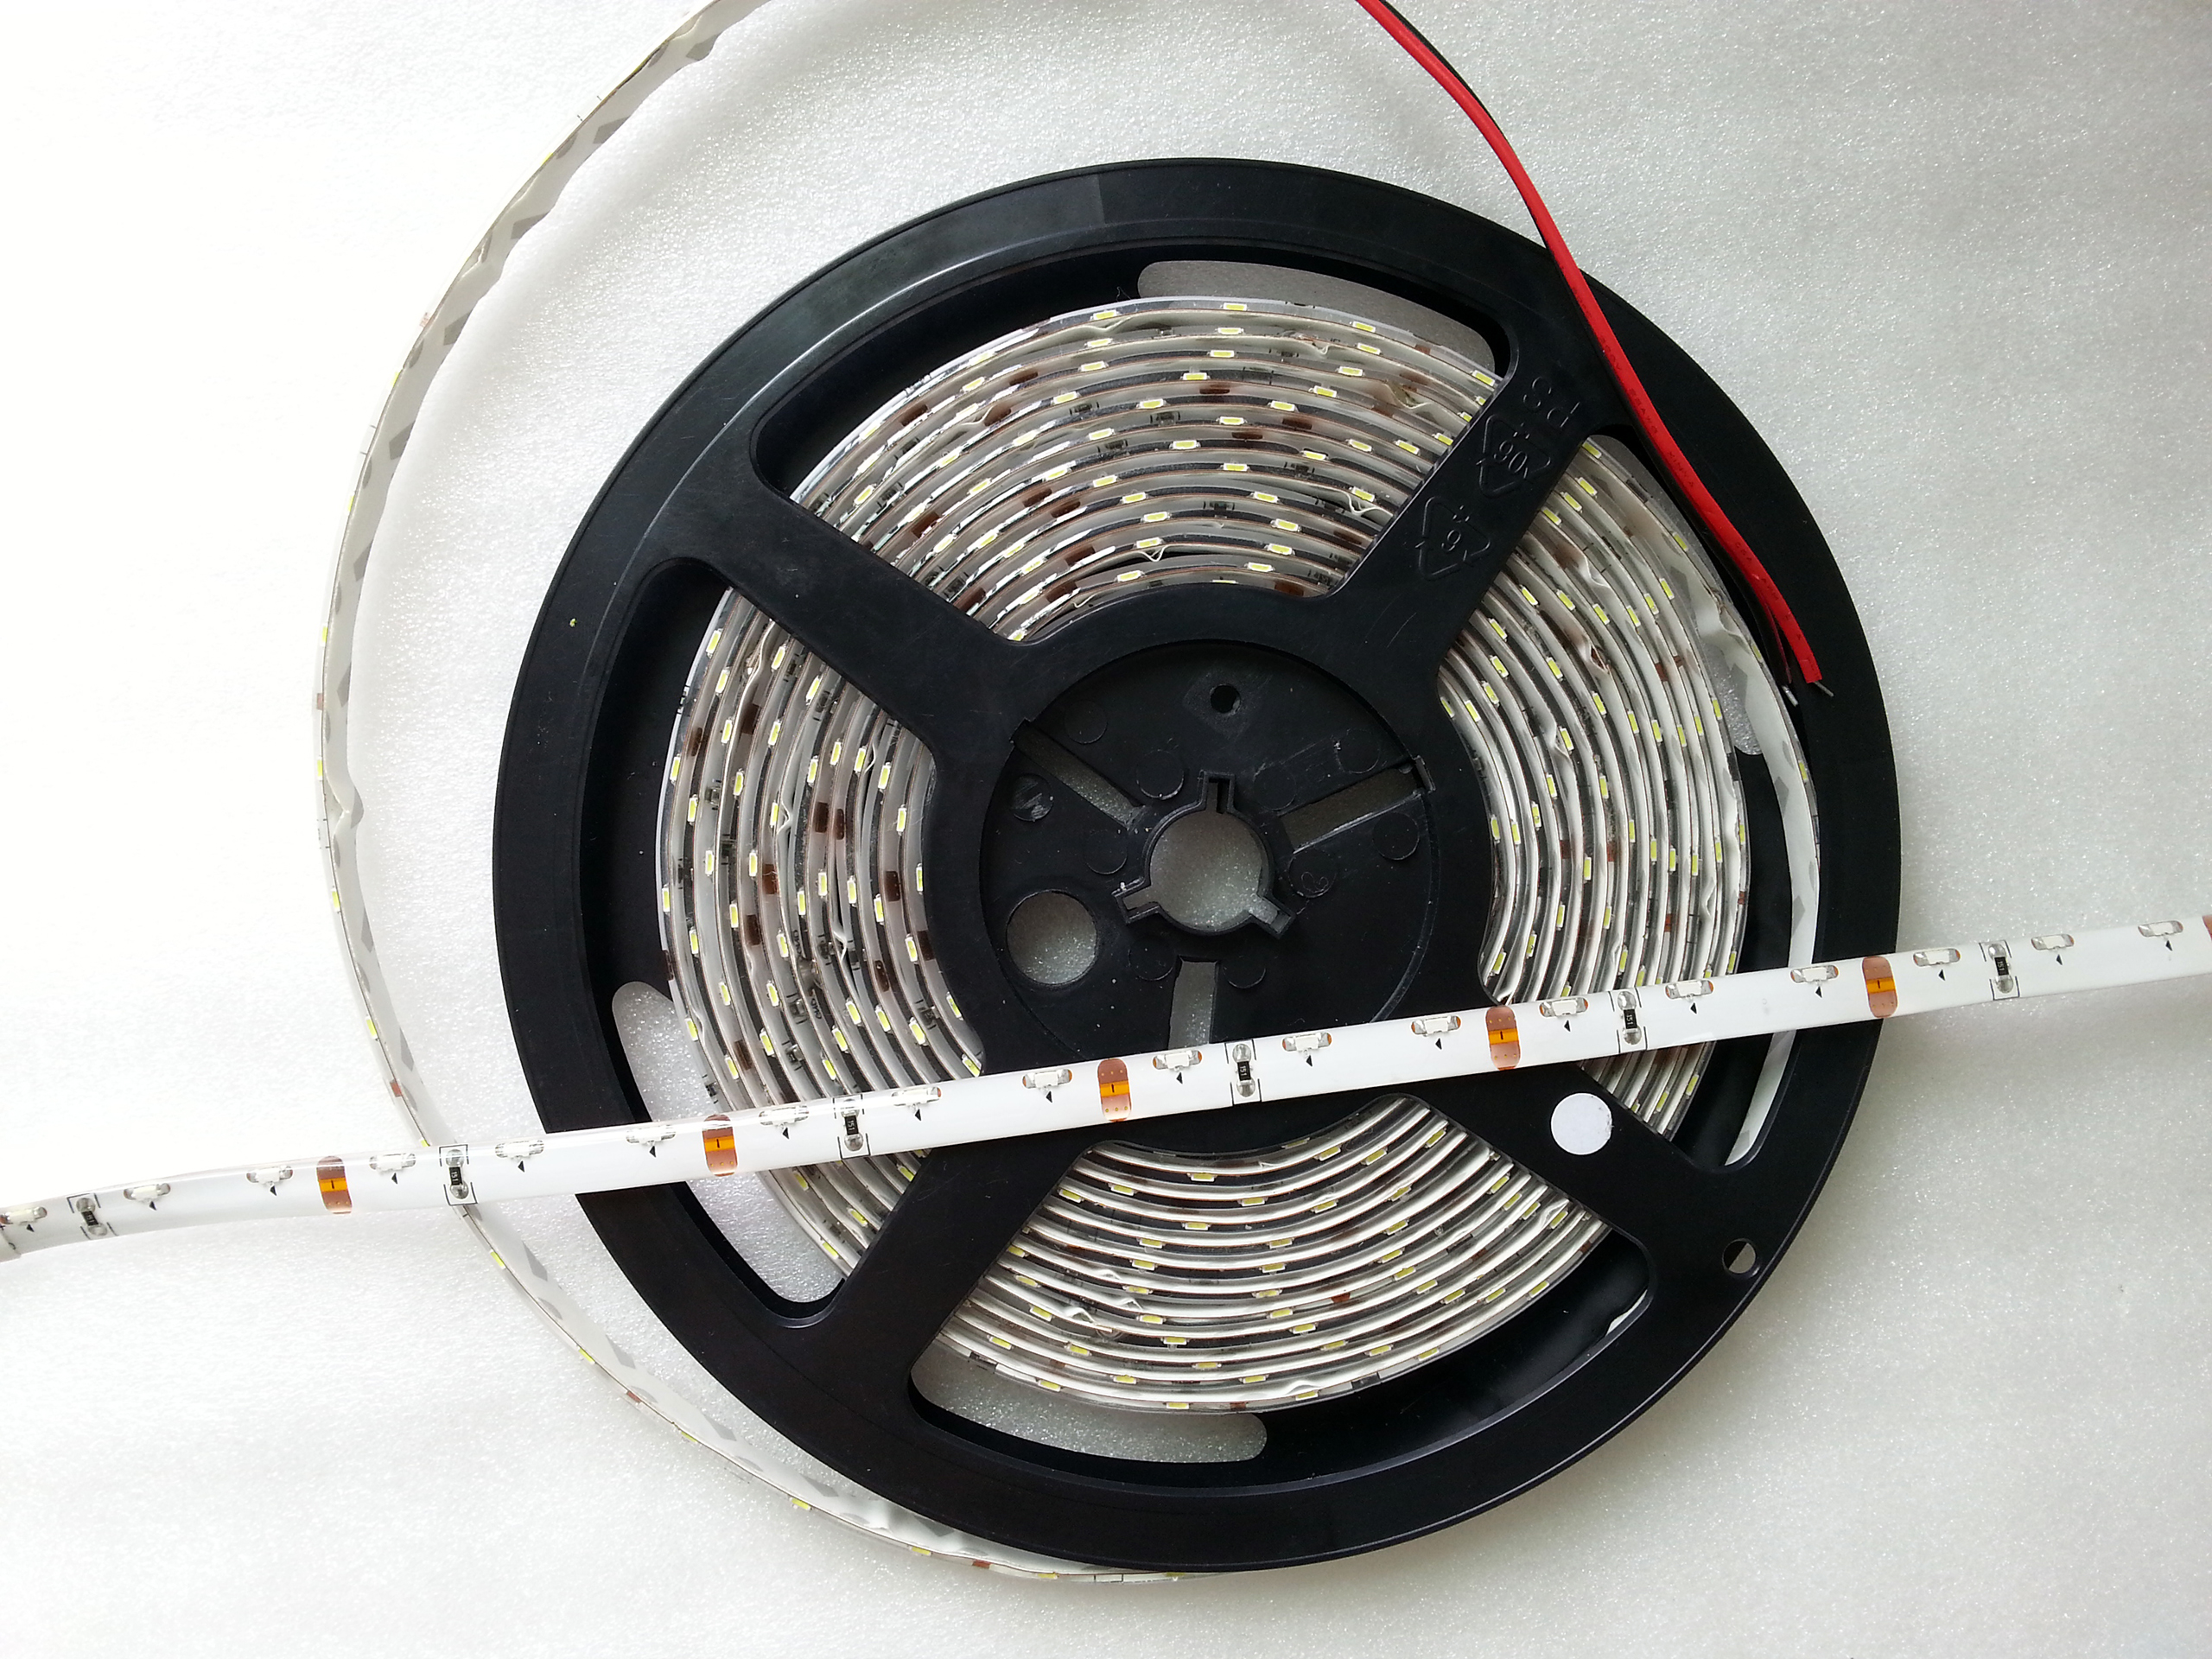 waterproof_sideview_pure_white_light_SMD_335_LED_strip